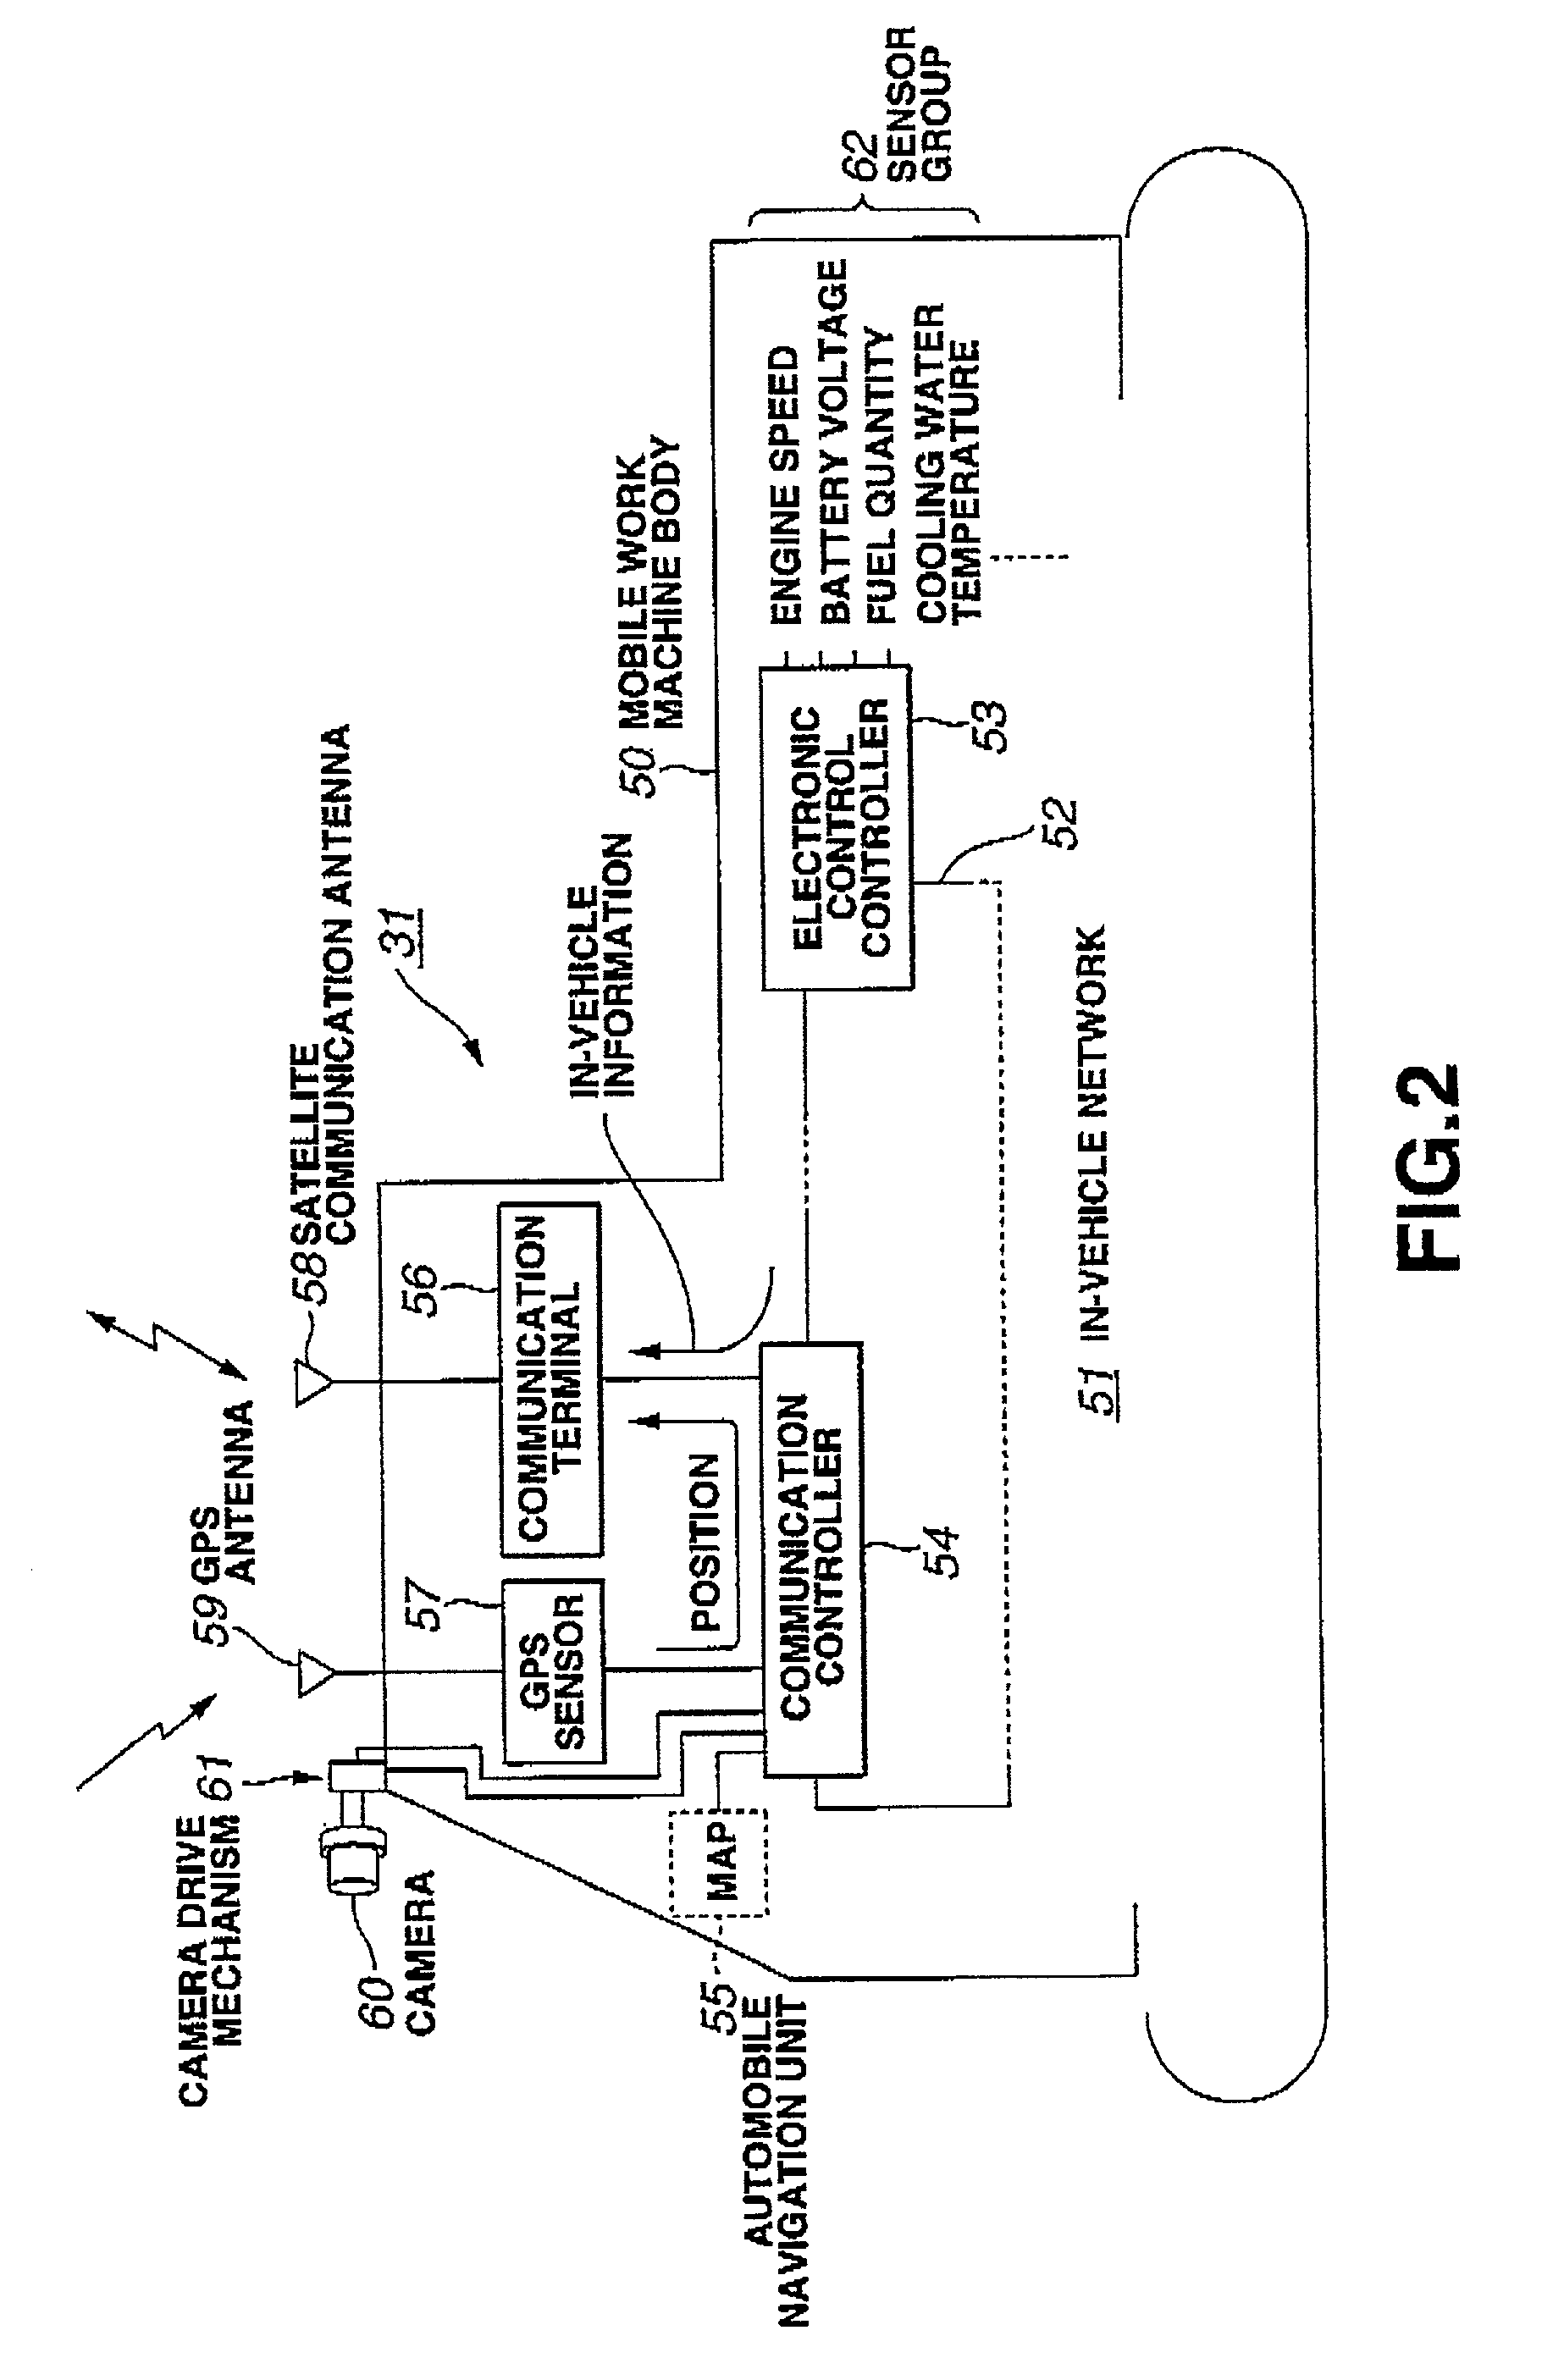 Device for presenting information to mobile